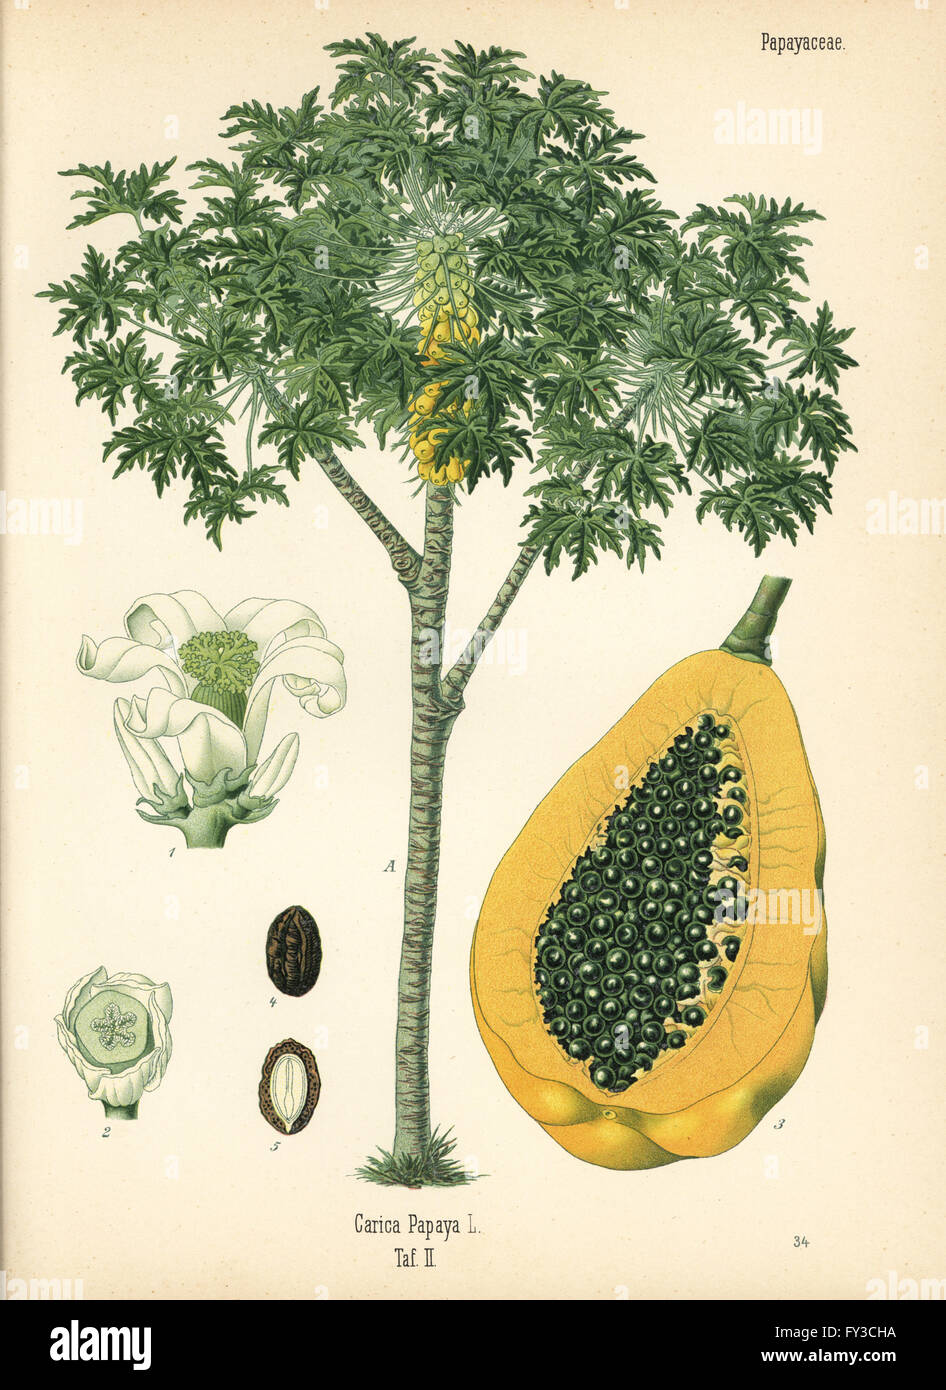 Papaya or papaw tree, Carica papaya, with ripe fruit in section. Chromolithograph after a botanical illustration from Hermann Adolph Koehler's Medicinal Plants, edited by Gustav Pabst, Koehler, Germany, 1887. Stock Photo